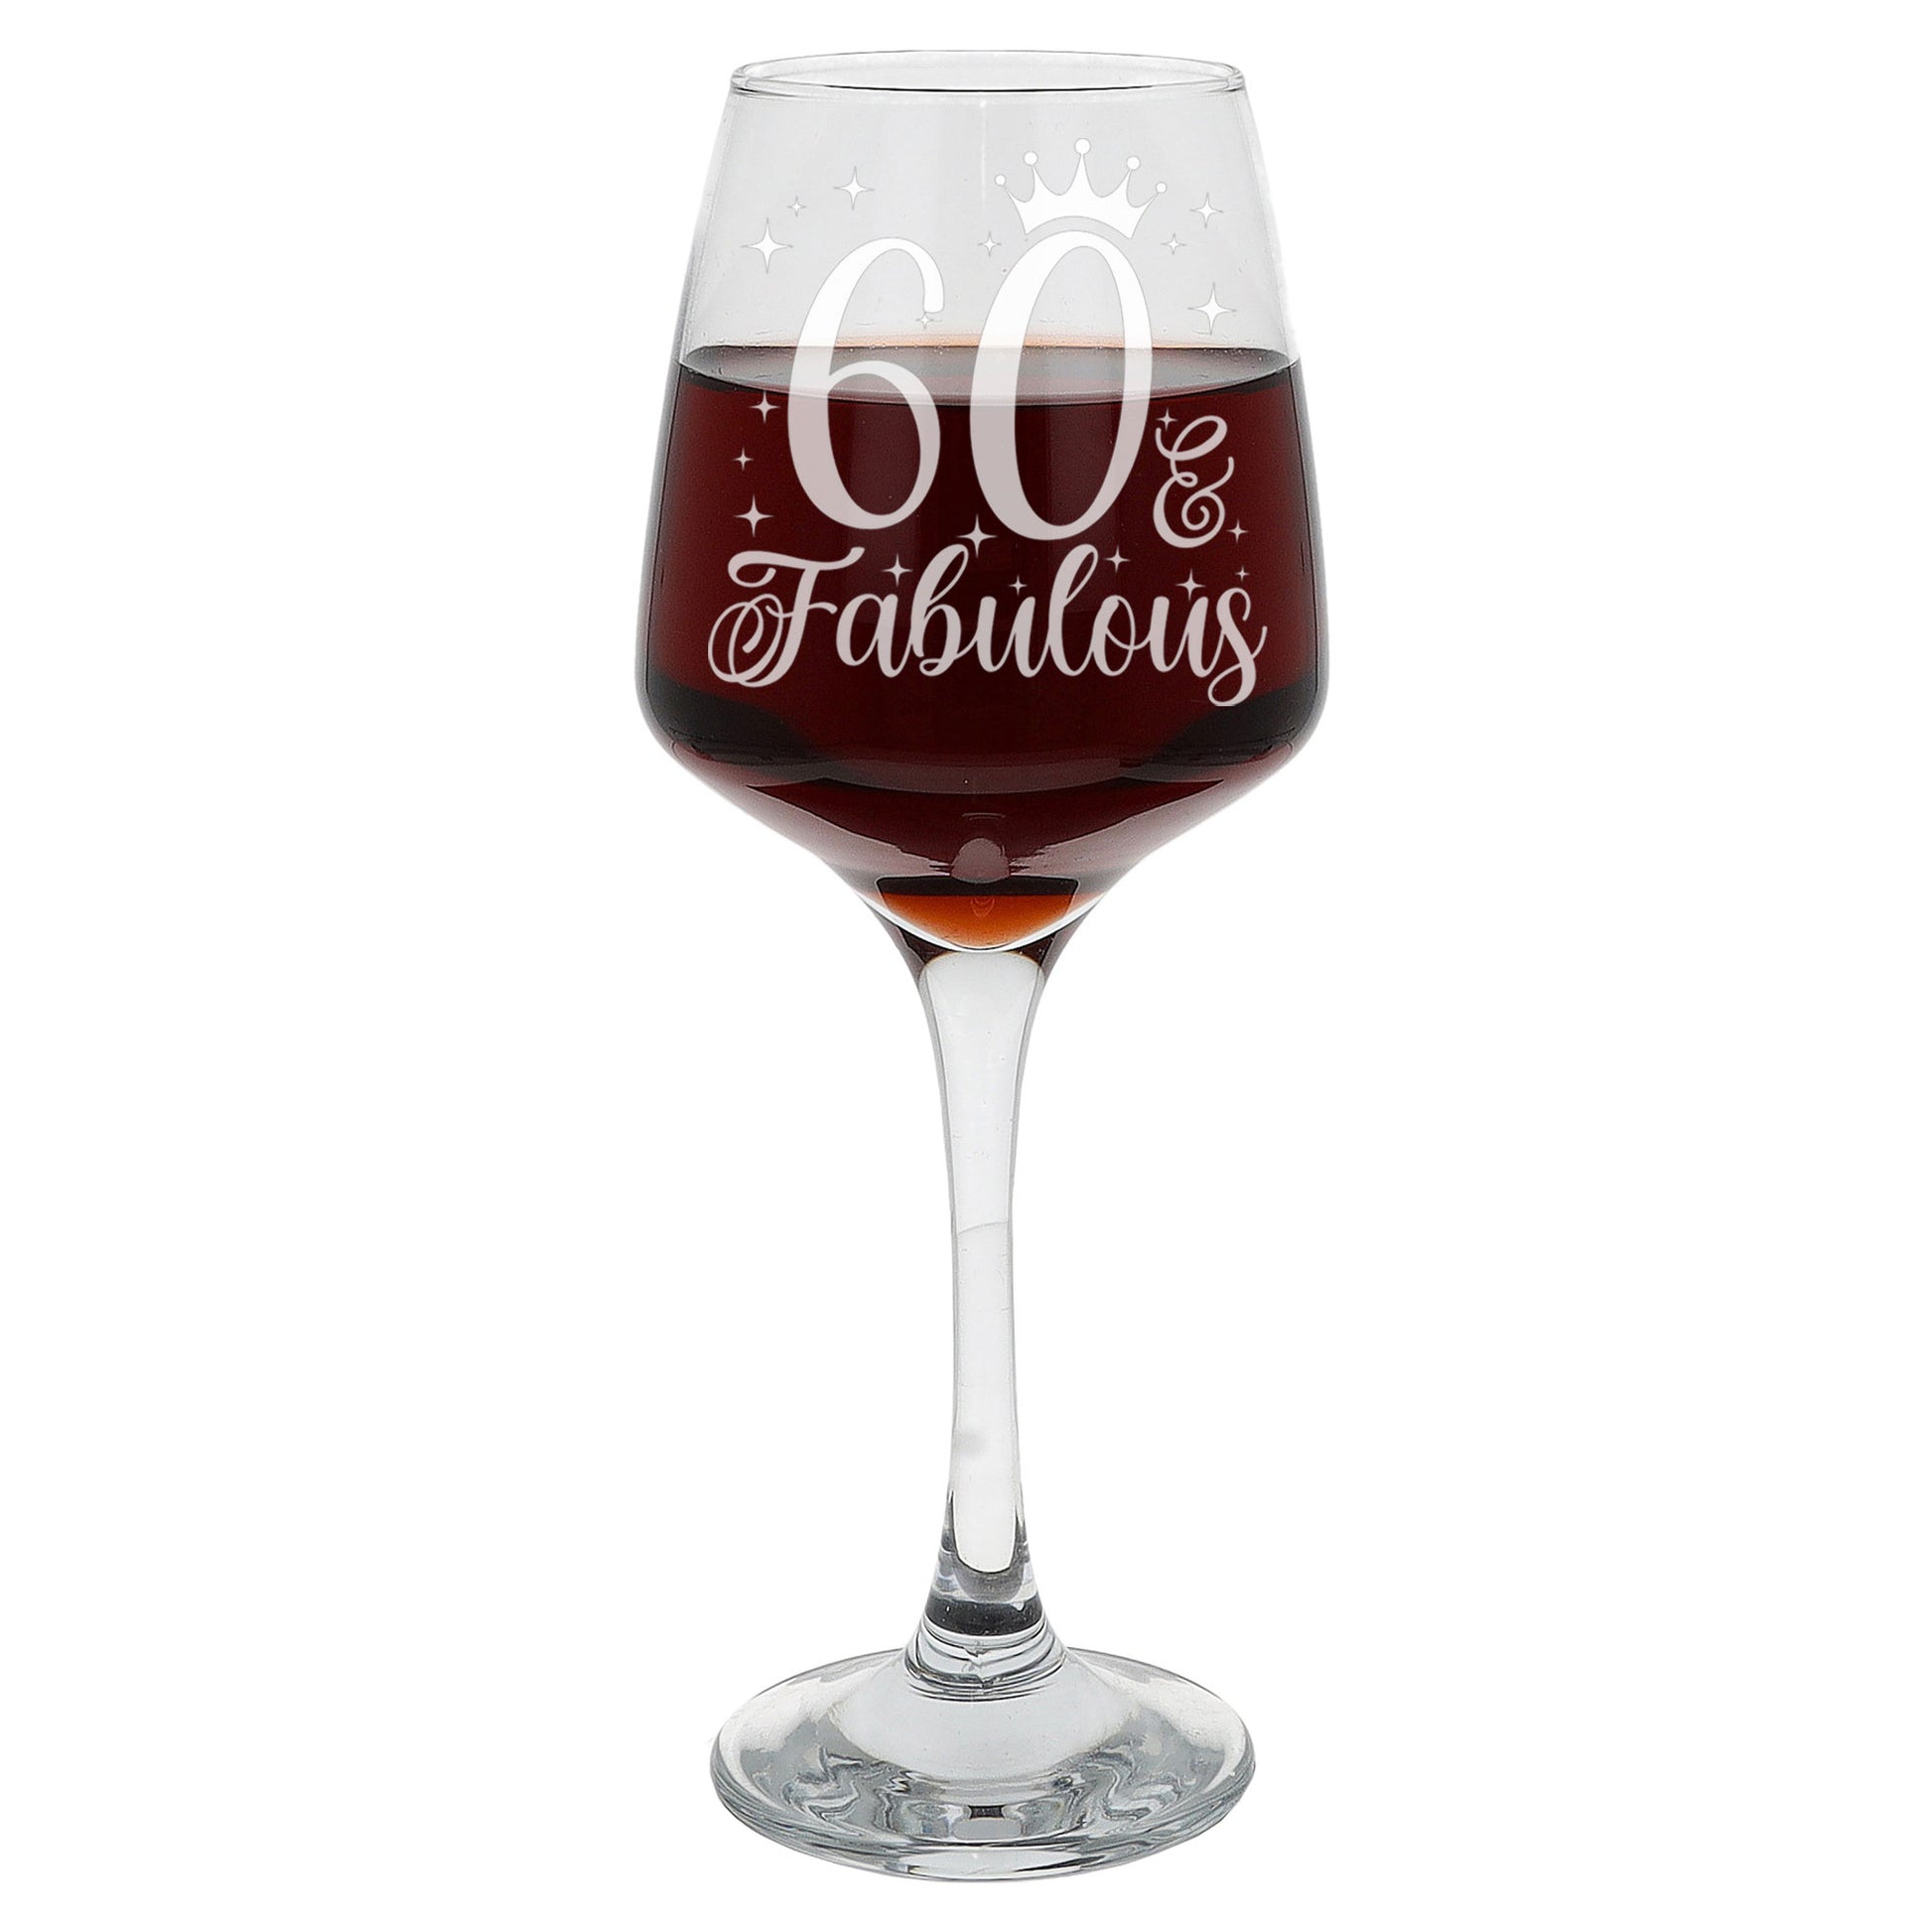 60 & Fabulous 60th Birthday Gift Engraved Wine Glass and/or Coaster Set  - Always Looking Good -   